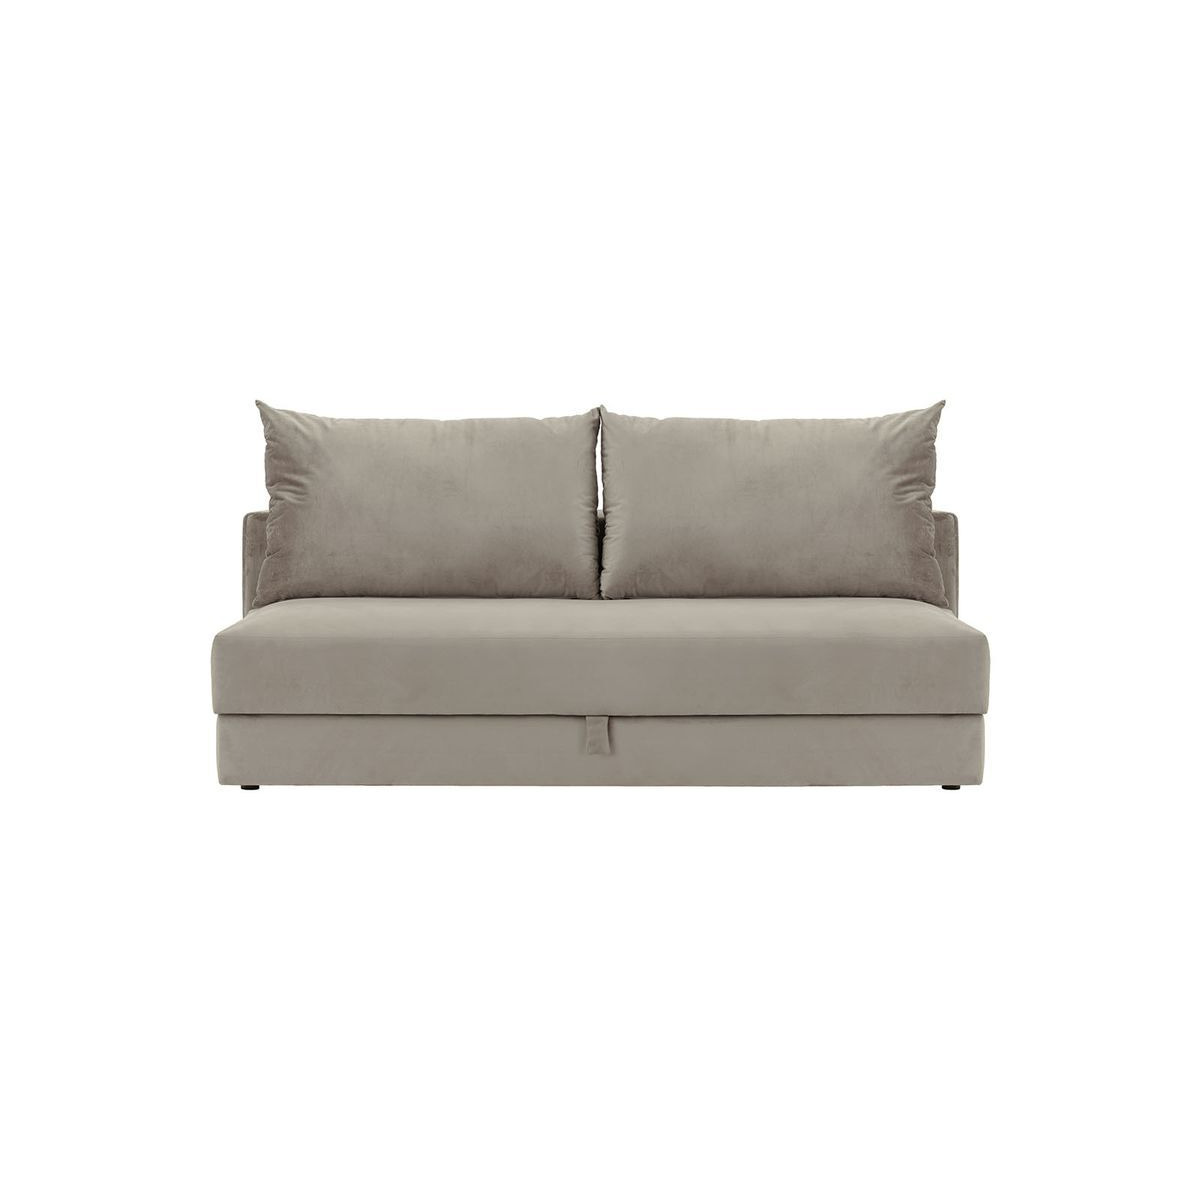 Vena 3 seater Sofa Bed, boucle beige - image 1